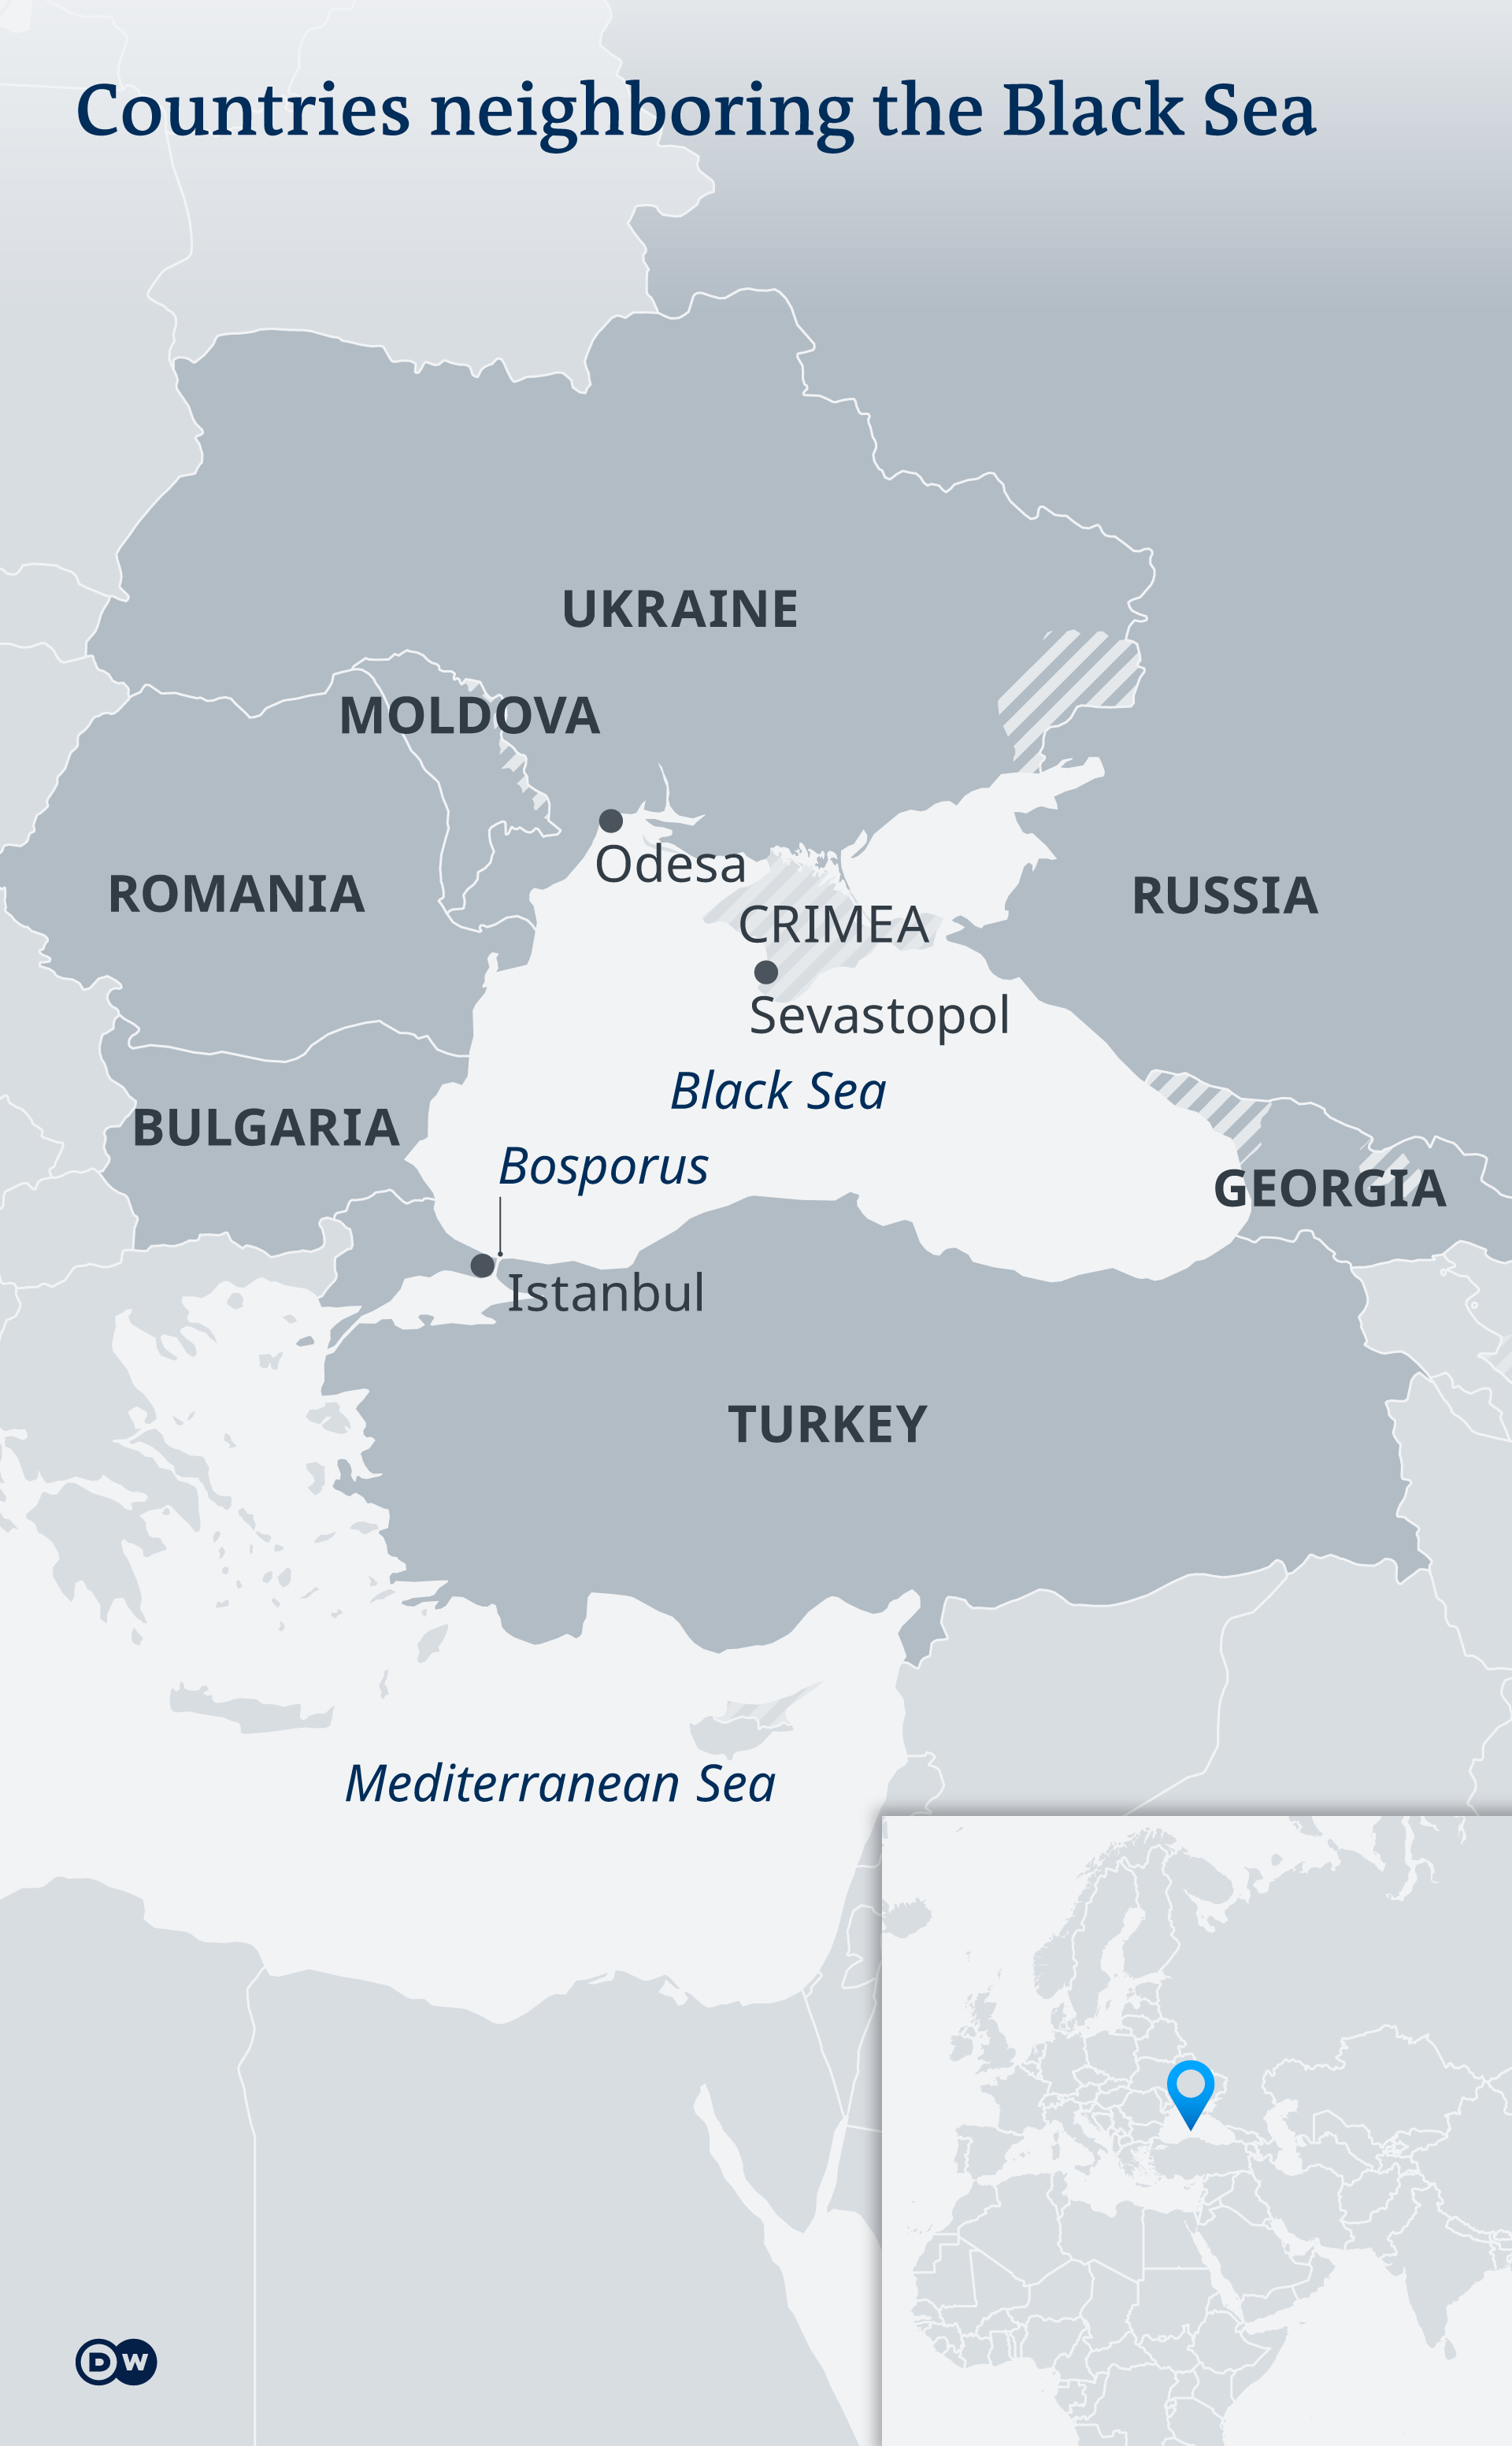 Map of the Black Sea and neighboring states